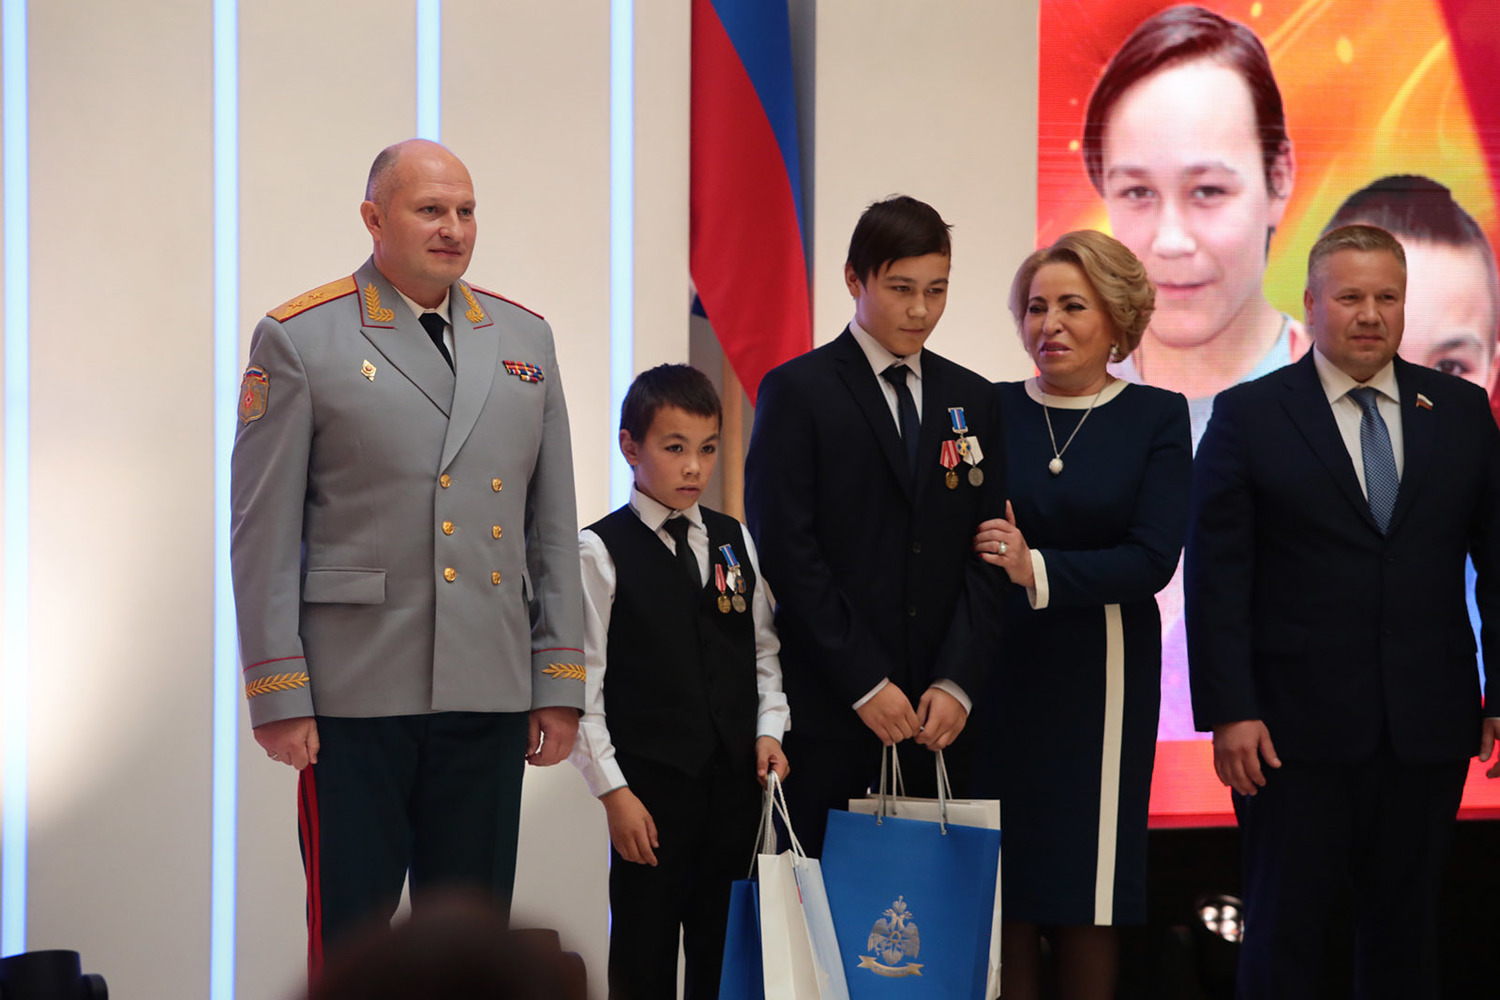 The Federation Council awarded child heroes: cadres of young rescuers and crime fighters